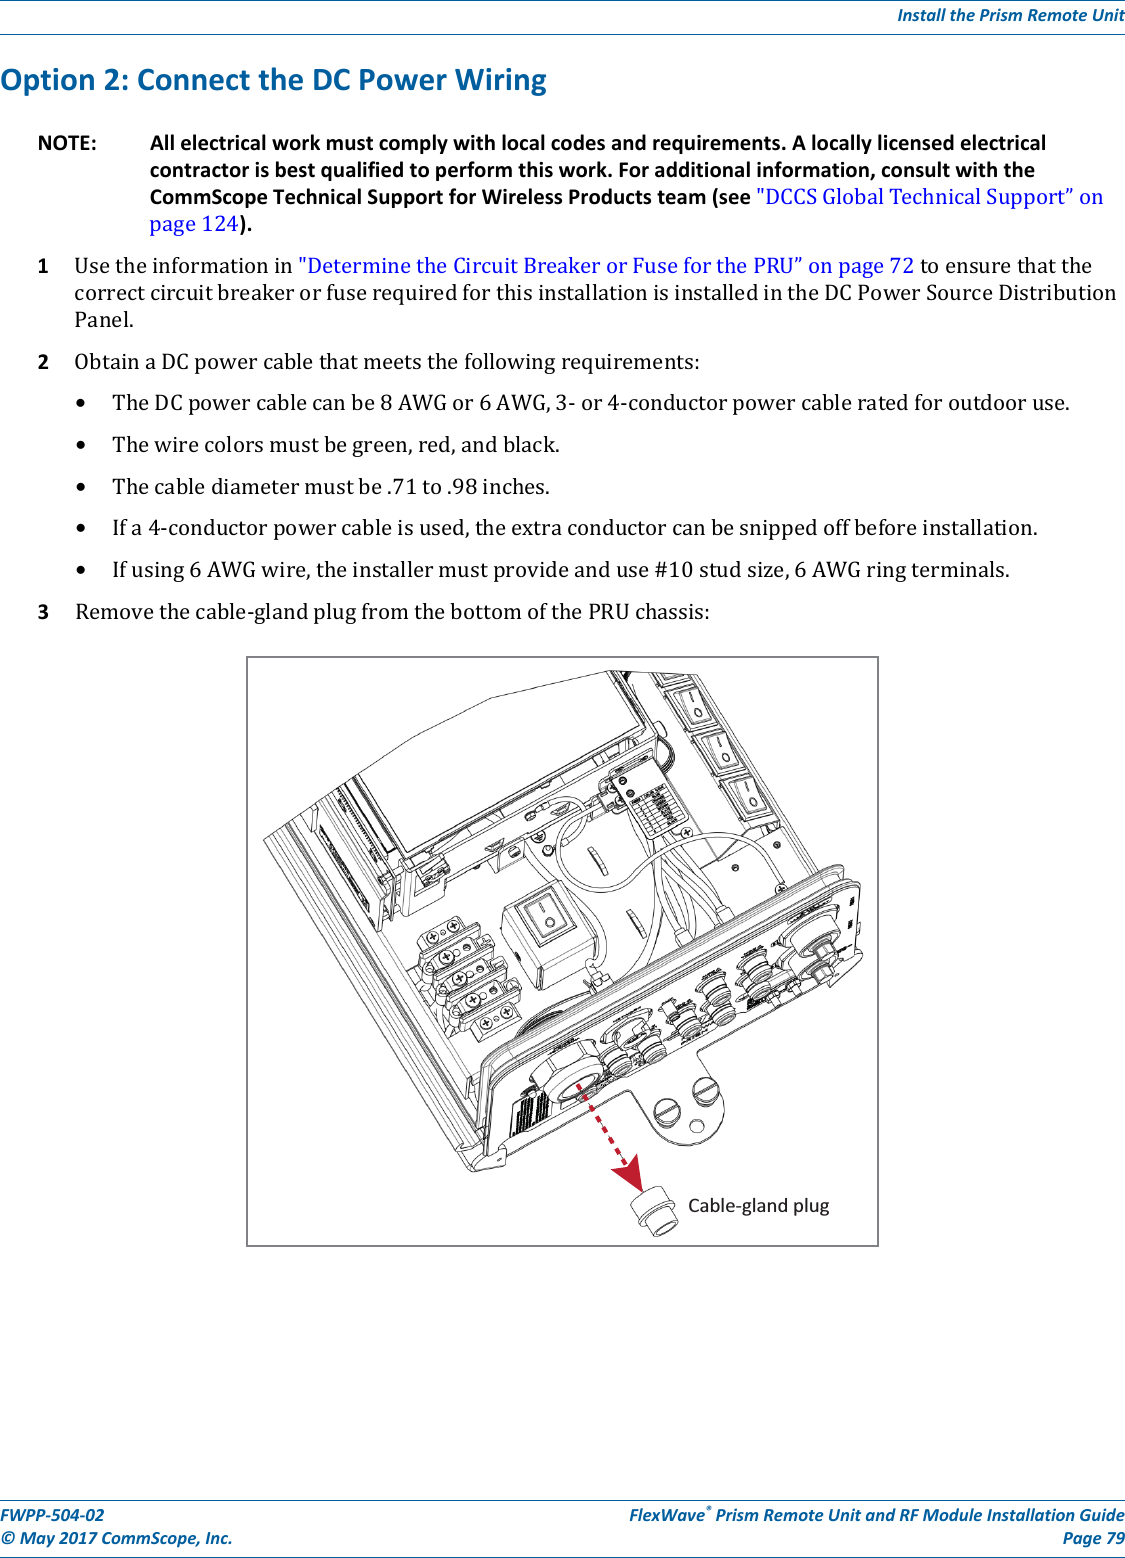 Install the Prism Remote UnitFWPP-504-02 FlexWave® Prism Remote Unit and RF Module Installation Guide© May 2017 CommScope, Inc. Page 79Option 2: Connect the DC Power WiringNOTE: All electrical work must comply with local codes and requirements. A locally licensed electrical contractor is best qualified to perform this work. For additional information, consult with the CommScope Technical Support for Wireless Products team (see &quot;DCCSGlobalTechnicalSupport”onpage124).1Usetheinformationin&quot;DeterminetheCircuitBreakerorFuseforthePRU”onpage72toensurethatthecorrectcircuitbreakerorfuserequiredforthisinstallationisinstalledintheDCPowerSourceDistributionPanel.2ObtainaDCpowercablethatmeetsthefollowingrequirements:•TheDCpowercablecanbe8AWGor6AWG,3-or4-conductorpowercableratedforoutdooruse.•Thewirecolorsmustbegreen,red,andblack.•Thecablediametermustbe.71to.98inches.•Ifa4-conductorpowercableisused,theextraconductorcanbesnippedoffbeforeinstallation.•Ifusing6AWGwire,theinstallermustprovideanduse#10studsize,6AWGringterminals.3Removethecable-glandplugfromthebottomofthePRUchassis:Cable-gland plug